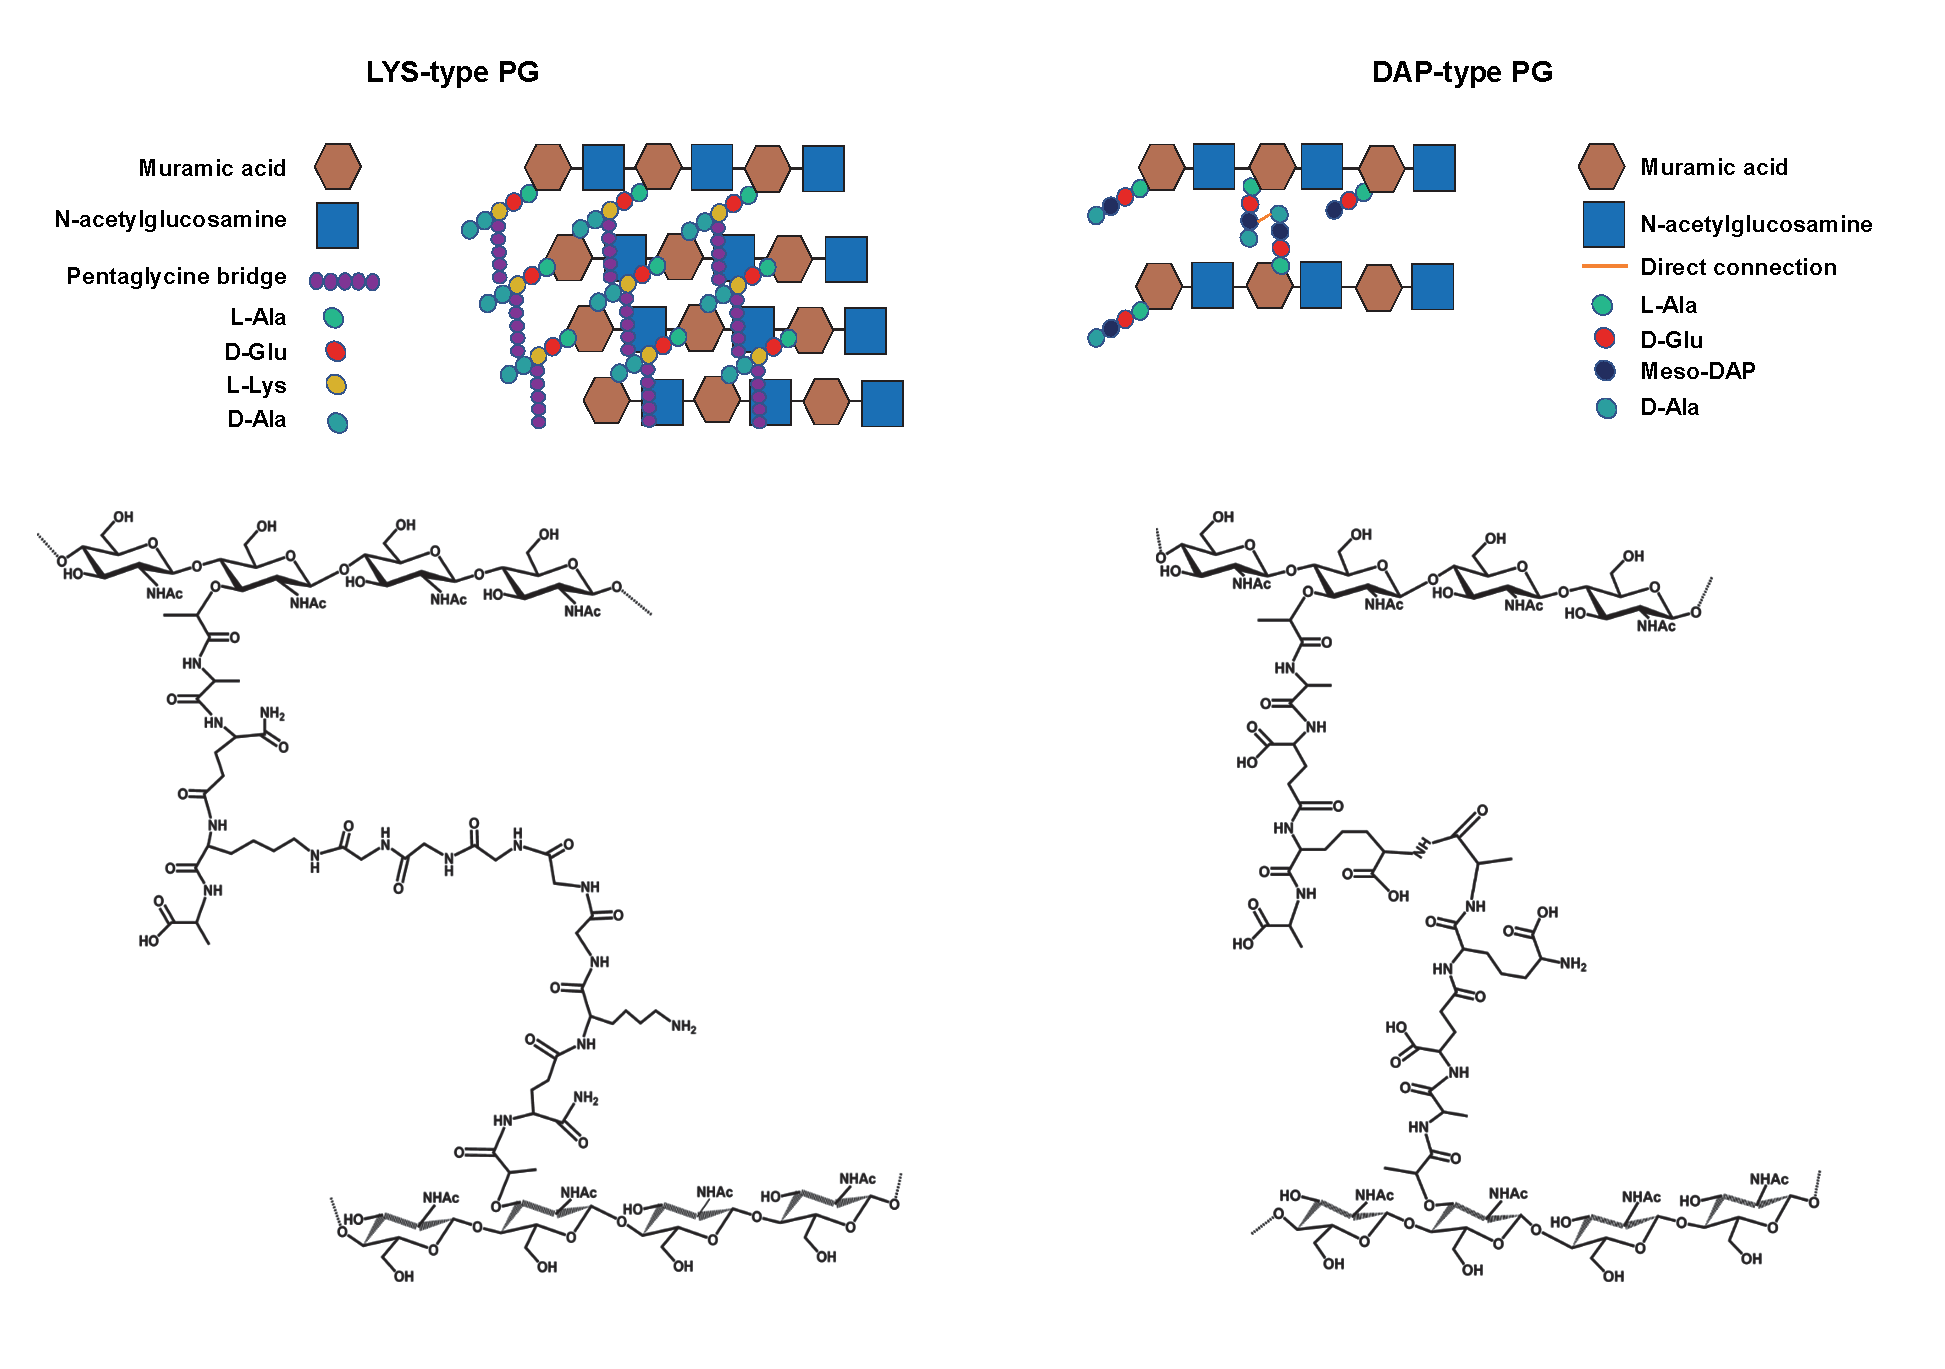 Figure 4: Cartoon representation (on the top) and chemical structure of LYS-type and DAP-type PG (at the bottom).